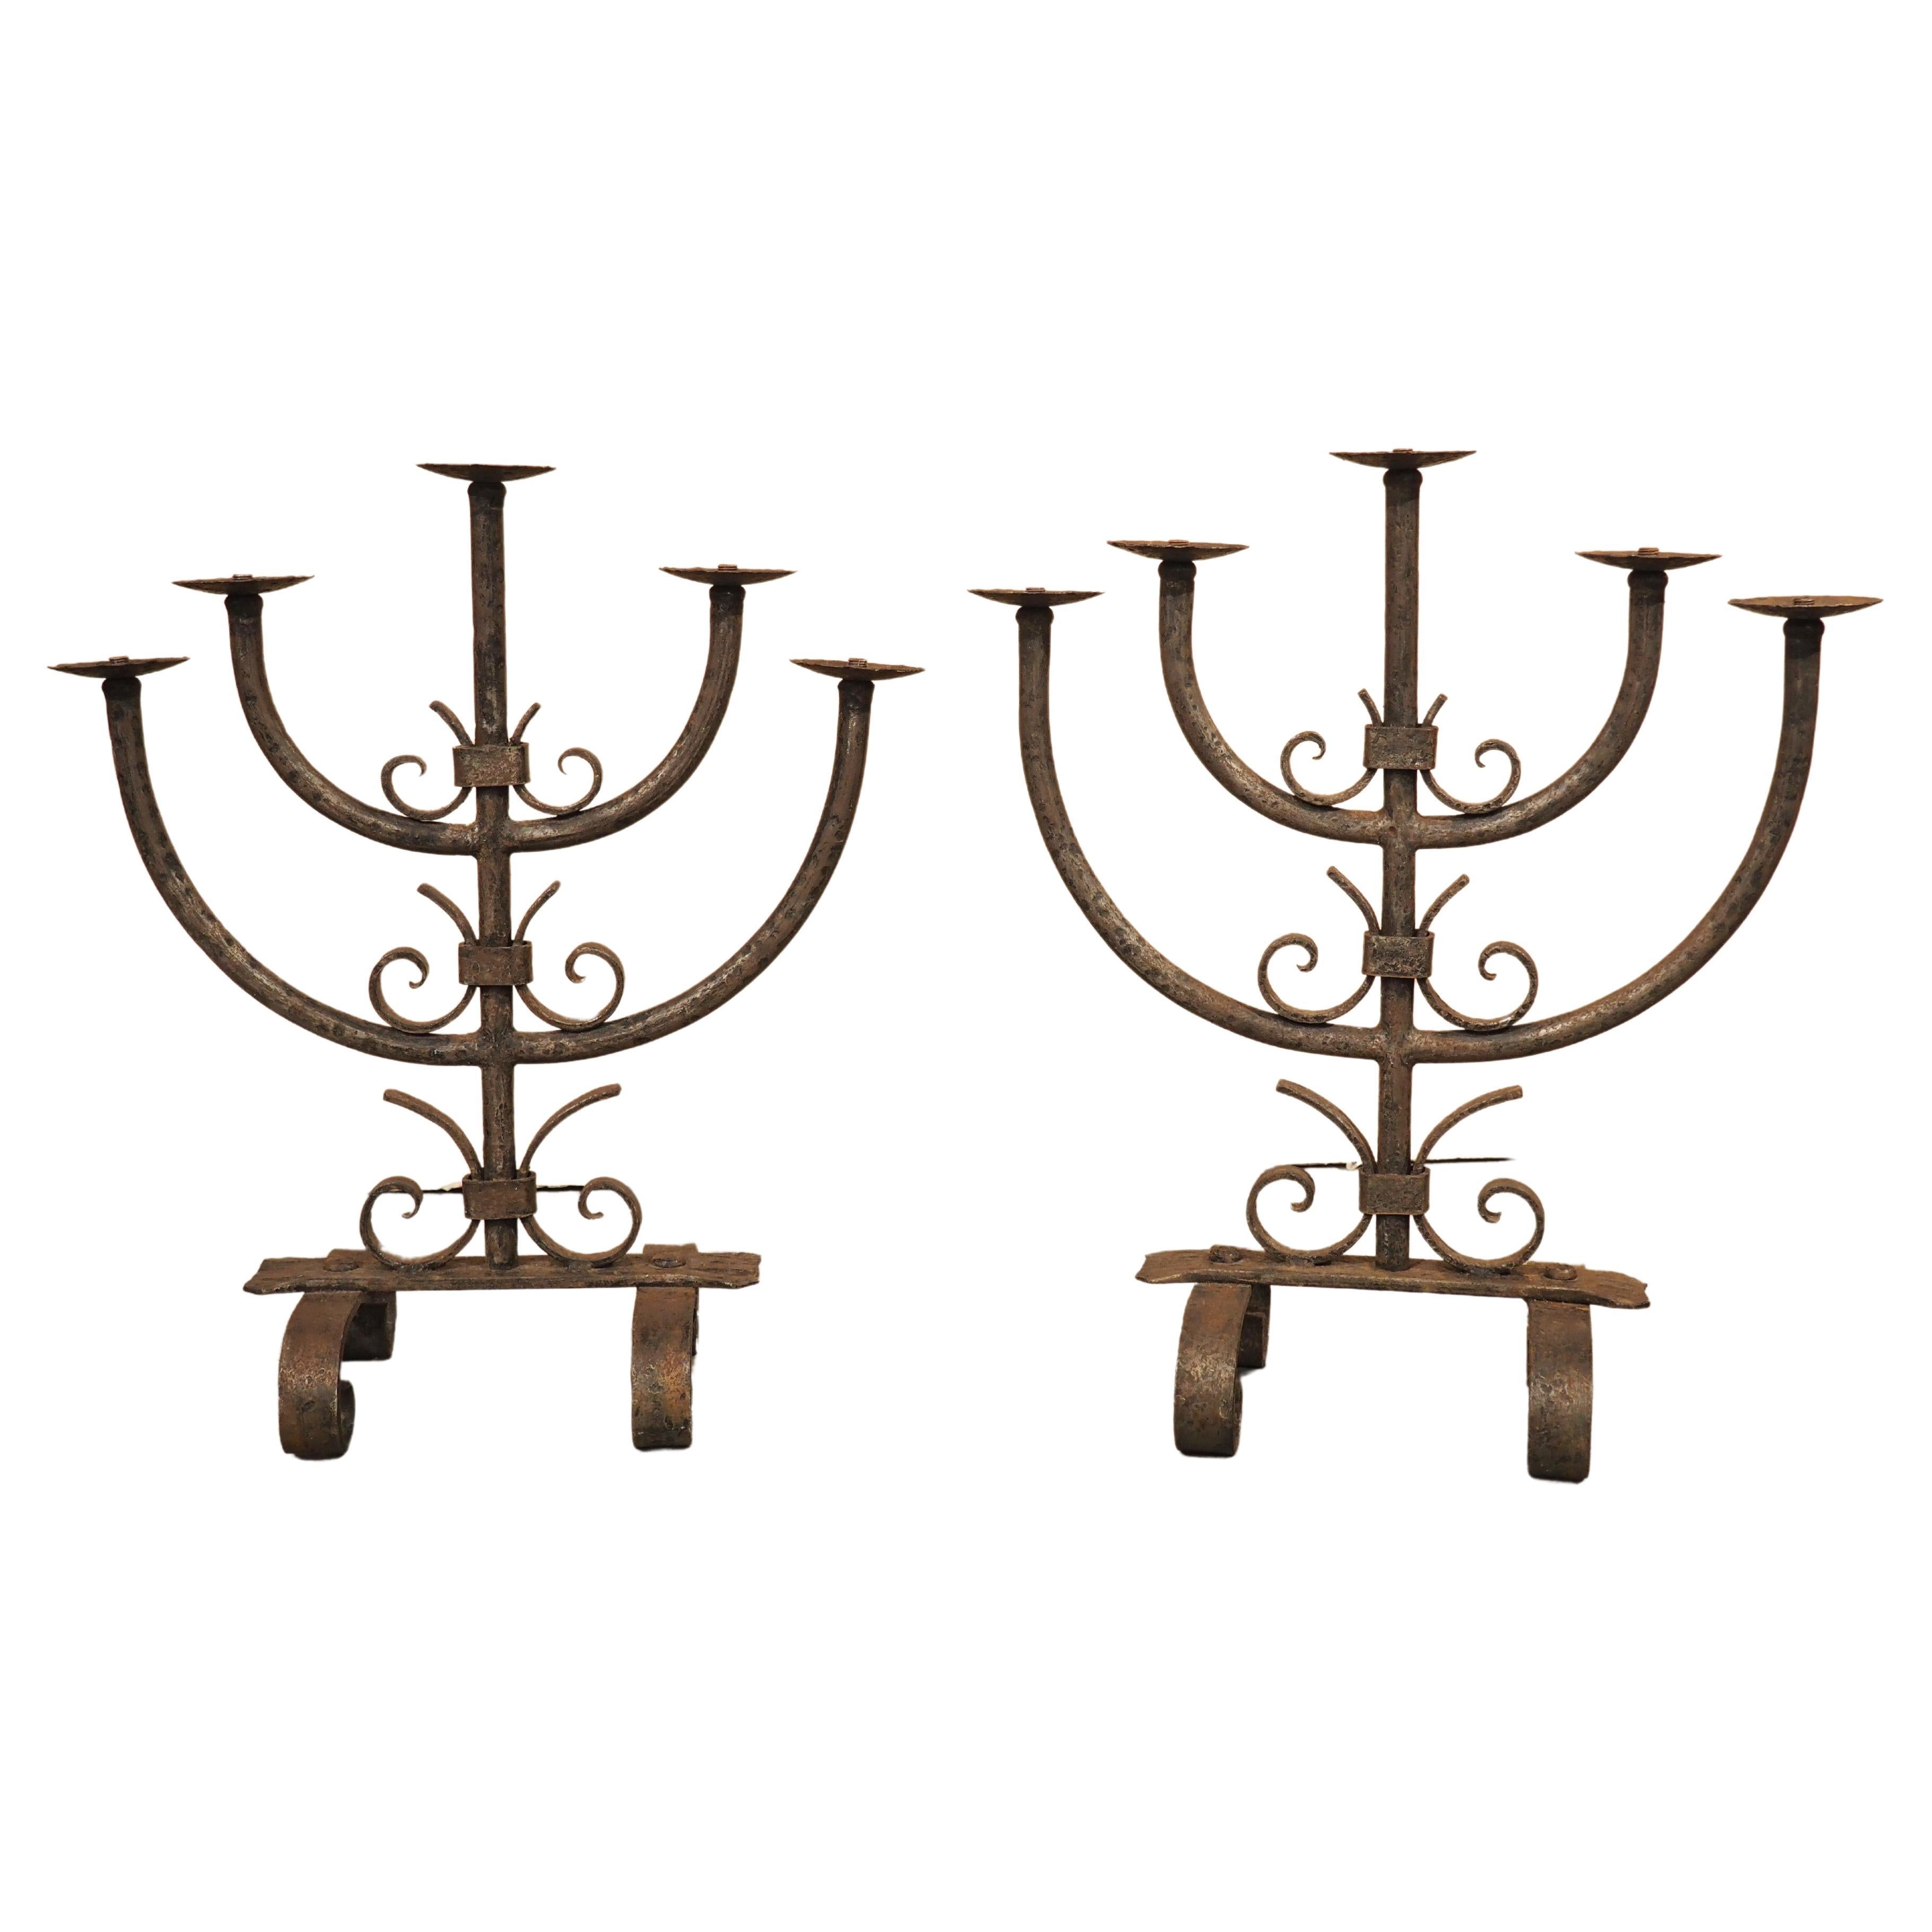 Pair of Antique Wrought Iron Candelabras from Bordeaux, France C. 1900